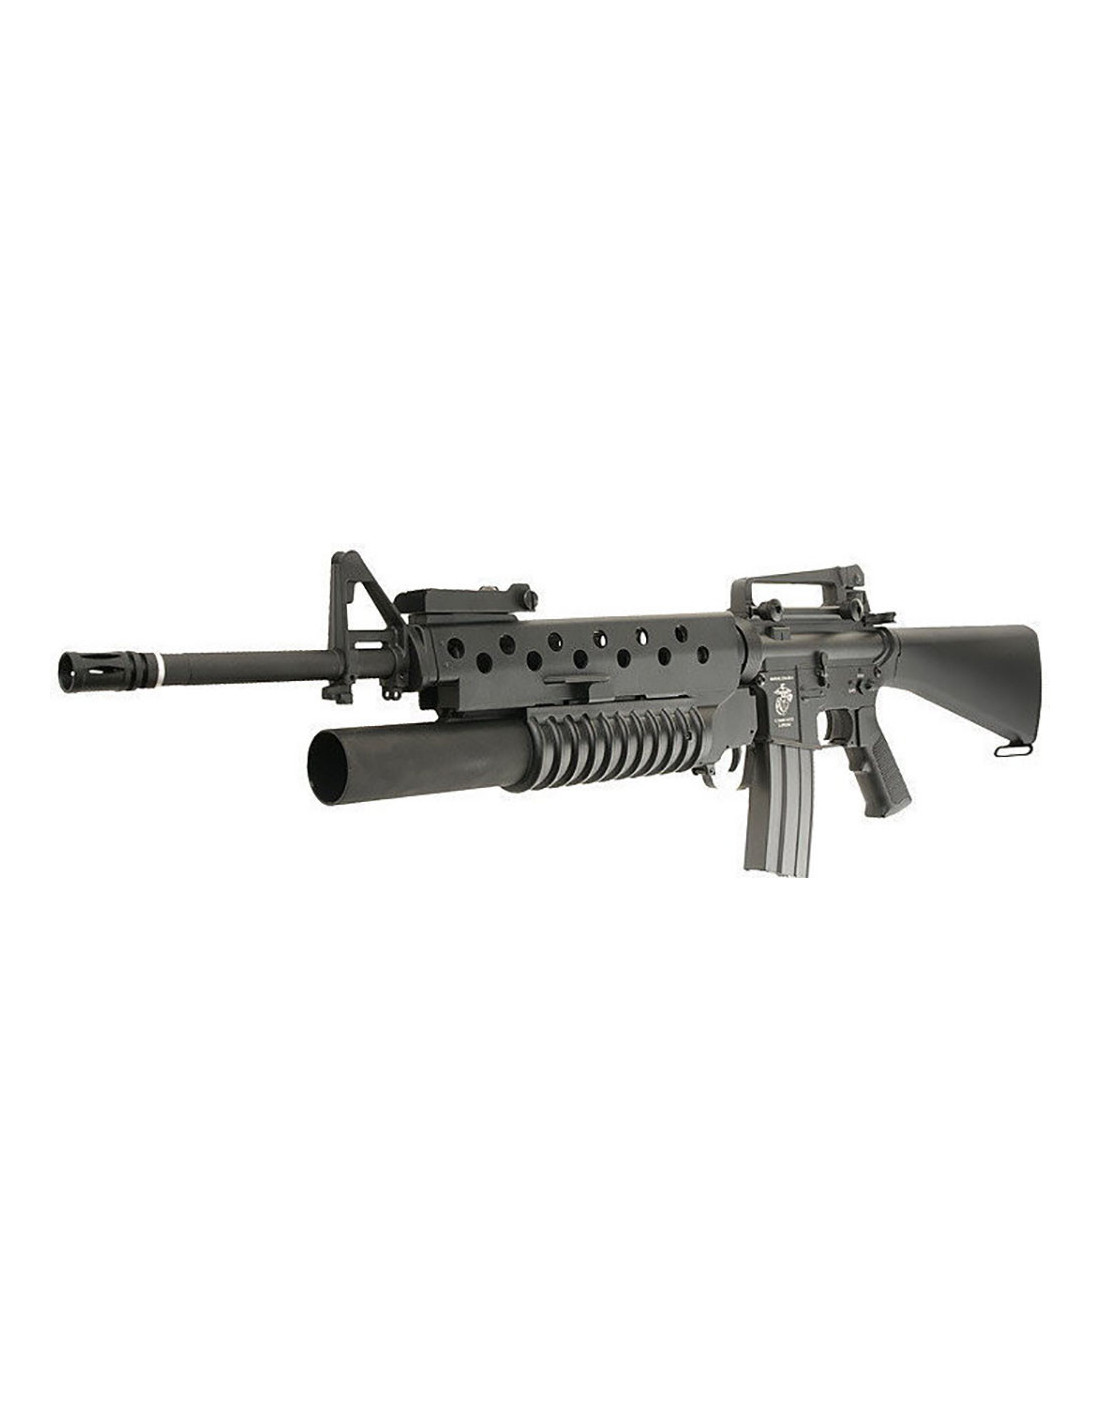 Assault rifle M16A3 with M203 AEG black ECEC System pic 3.